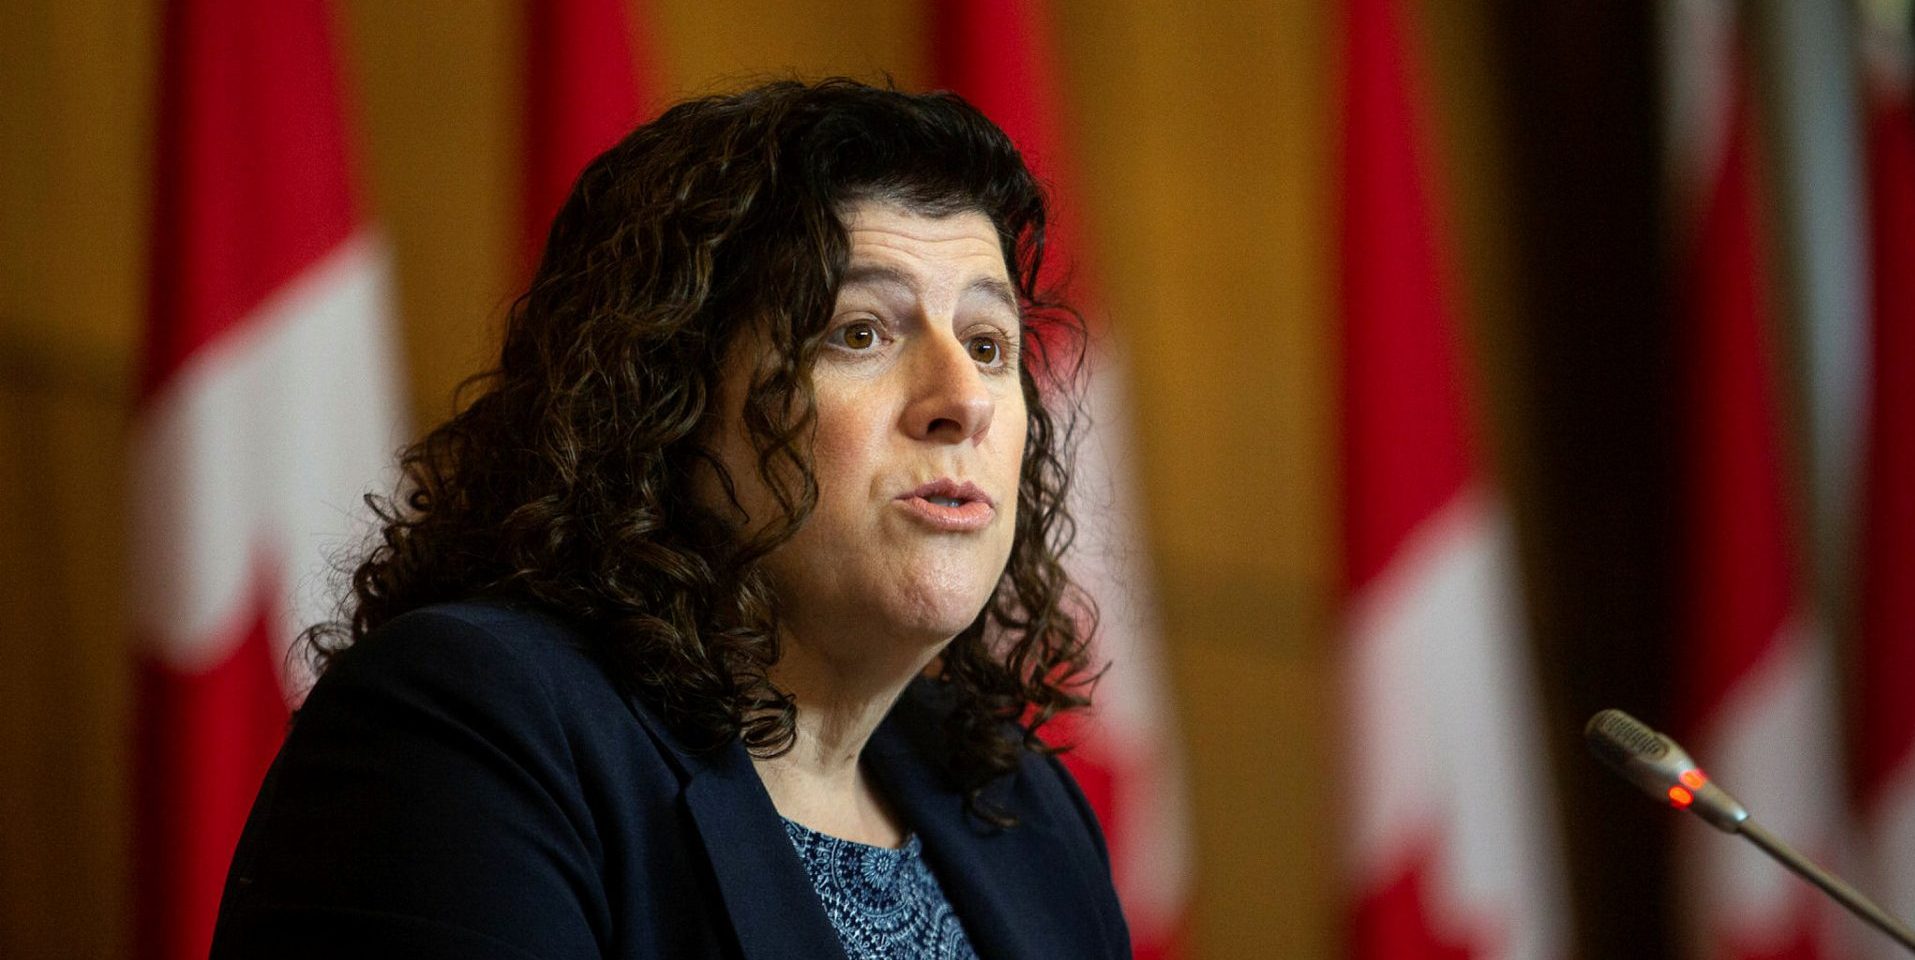 Auditor General Karen Hogan holds a press conference in Ottawa on  Nov. 15, 2022, after the November 2022 reports were tabled in the House of Commons. Andrew Meade